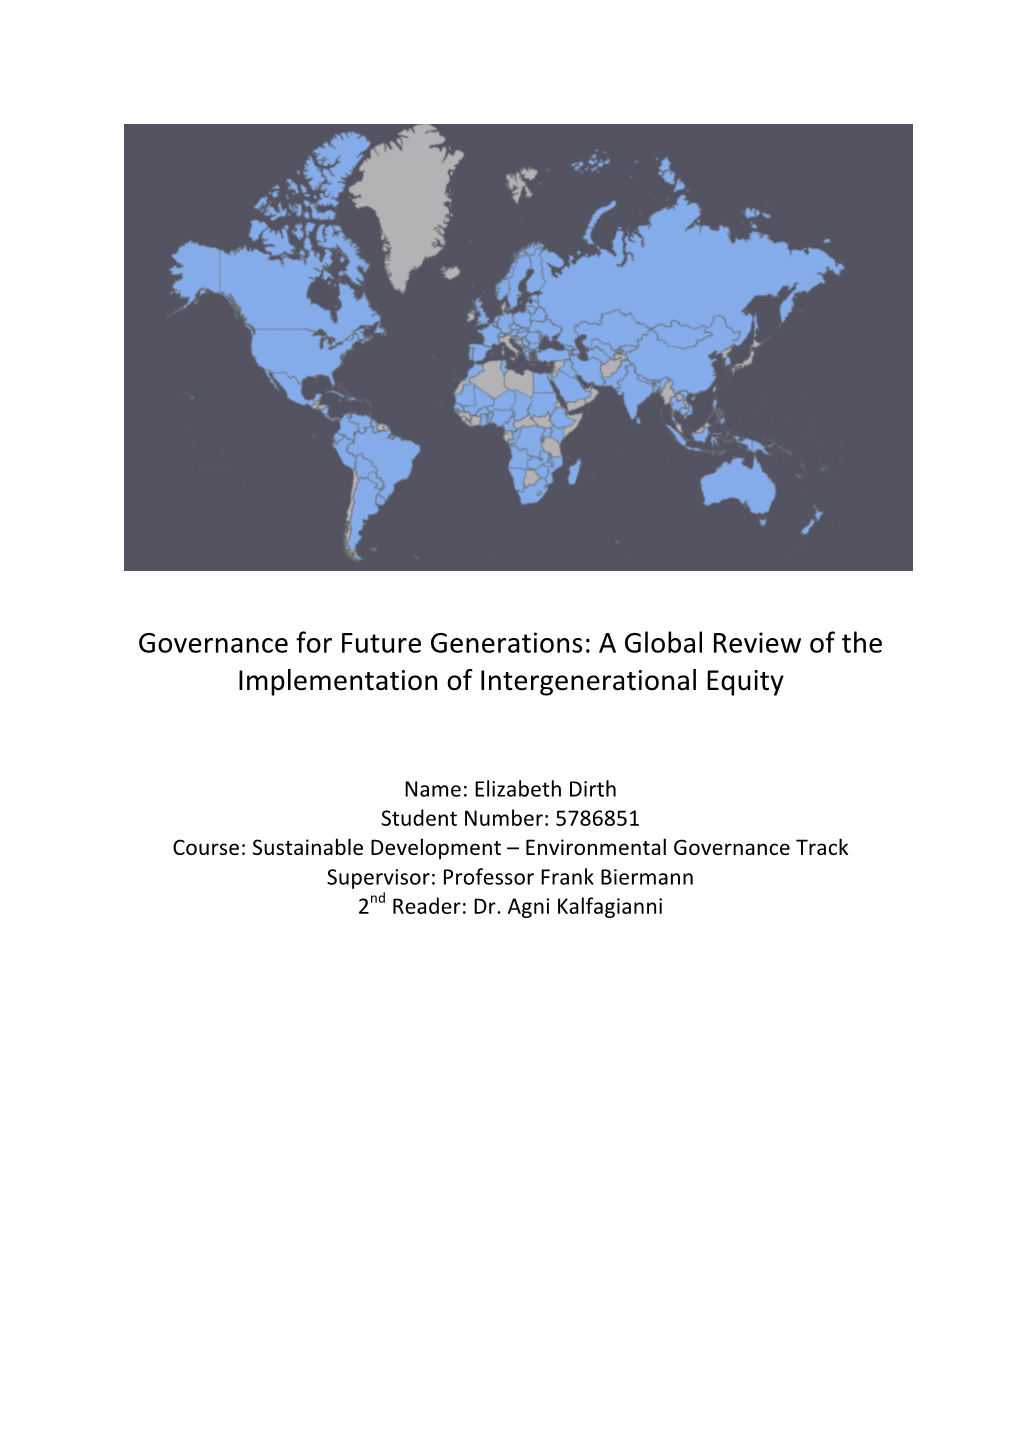 Governance for Future Generations: a Global Review of the Implementation of Intergenerational Equity